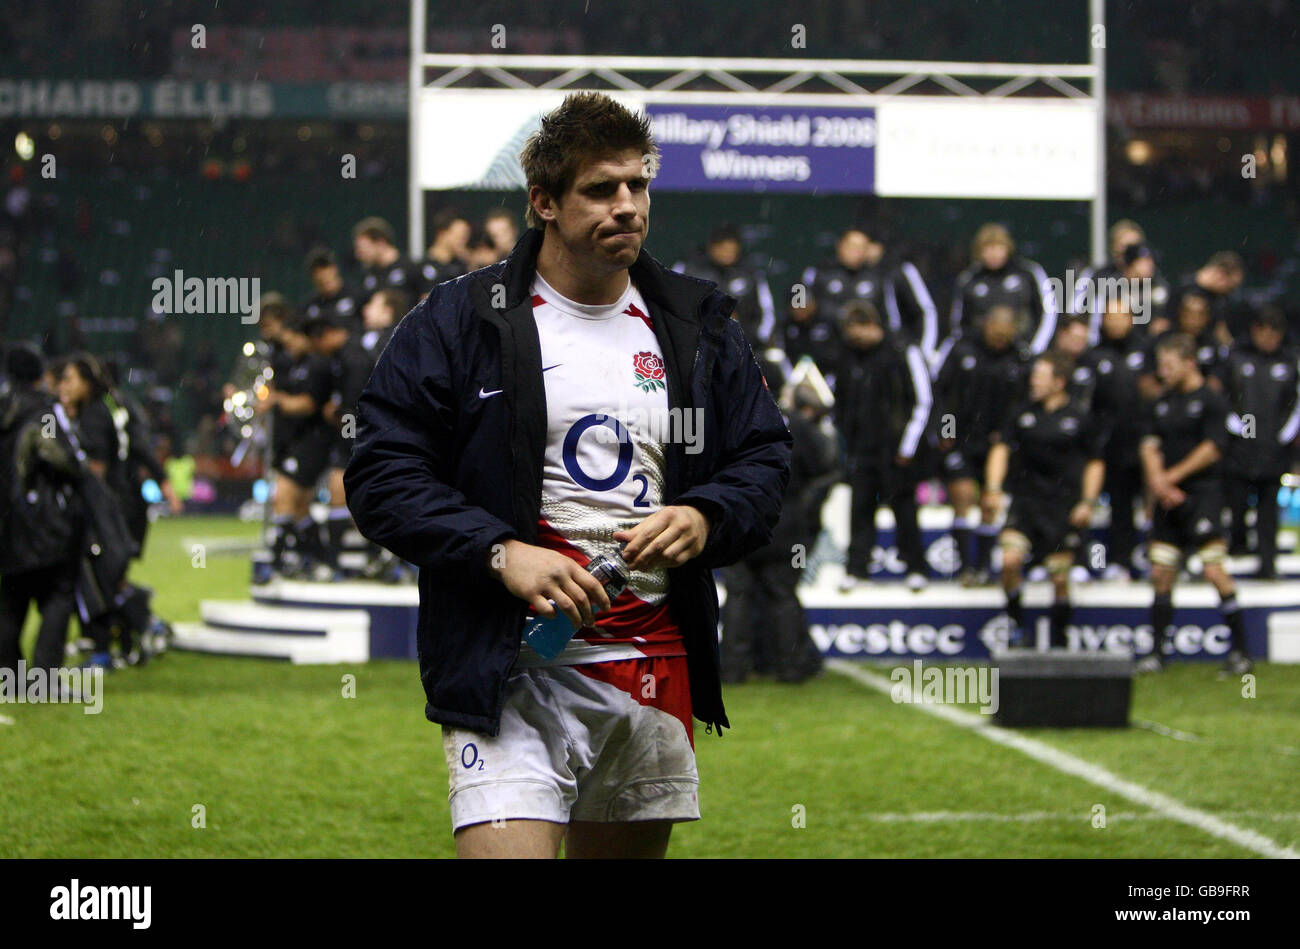 England's Michael Lipman leaves the field as New Zealand are awarded the Hilary Shield following during the Investec Challenge Series match at the Twickenham, London. Stock Photo